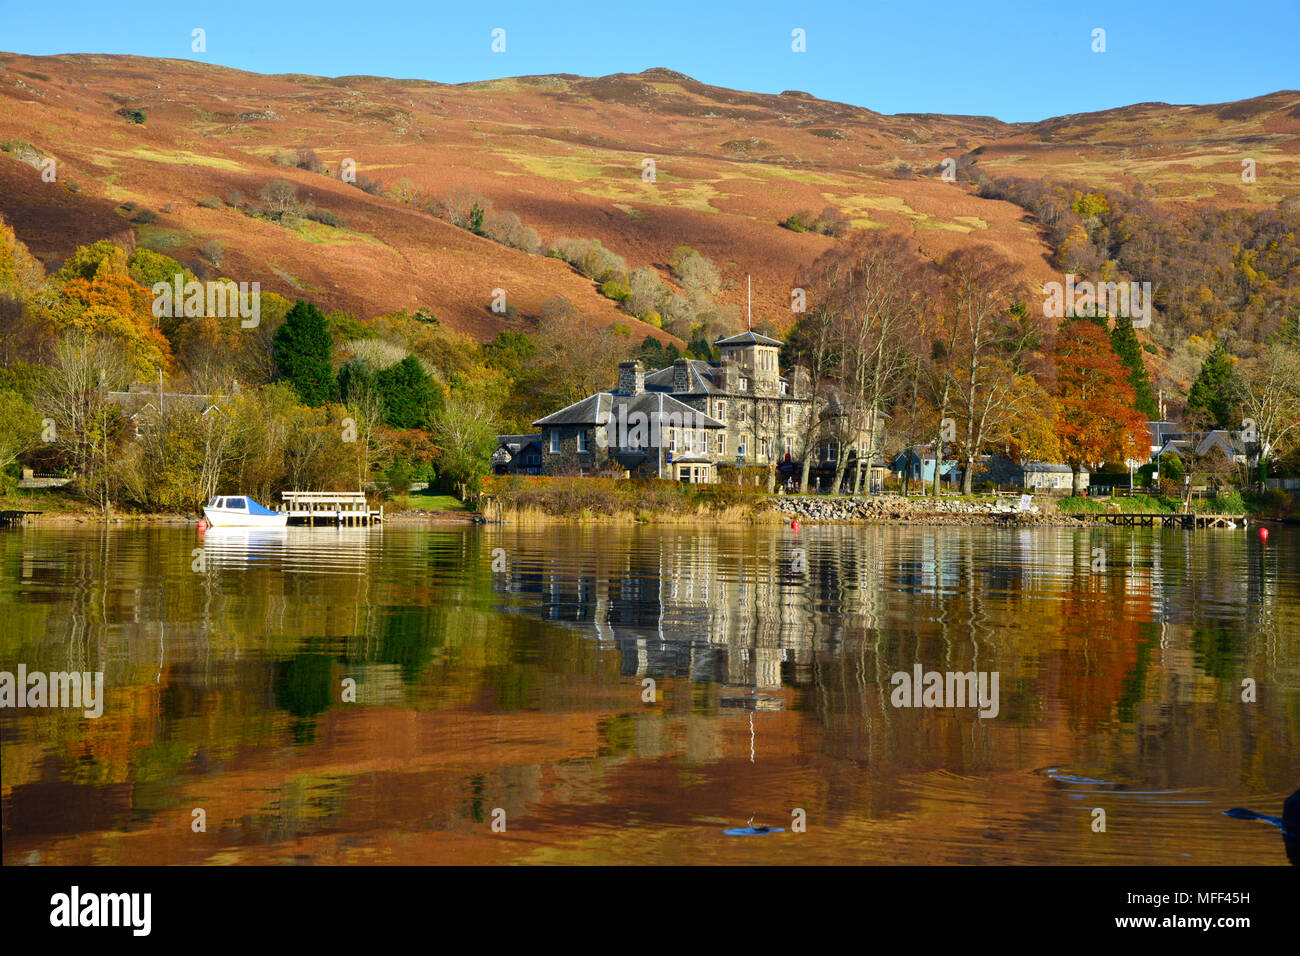 Looking across Loch Earn to St Fillans village, Scotland UK  Autumn colours and reflections clear blue sky sunny day October 2017 Stock Photo